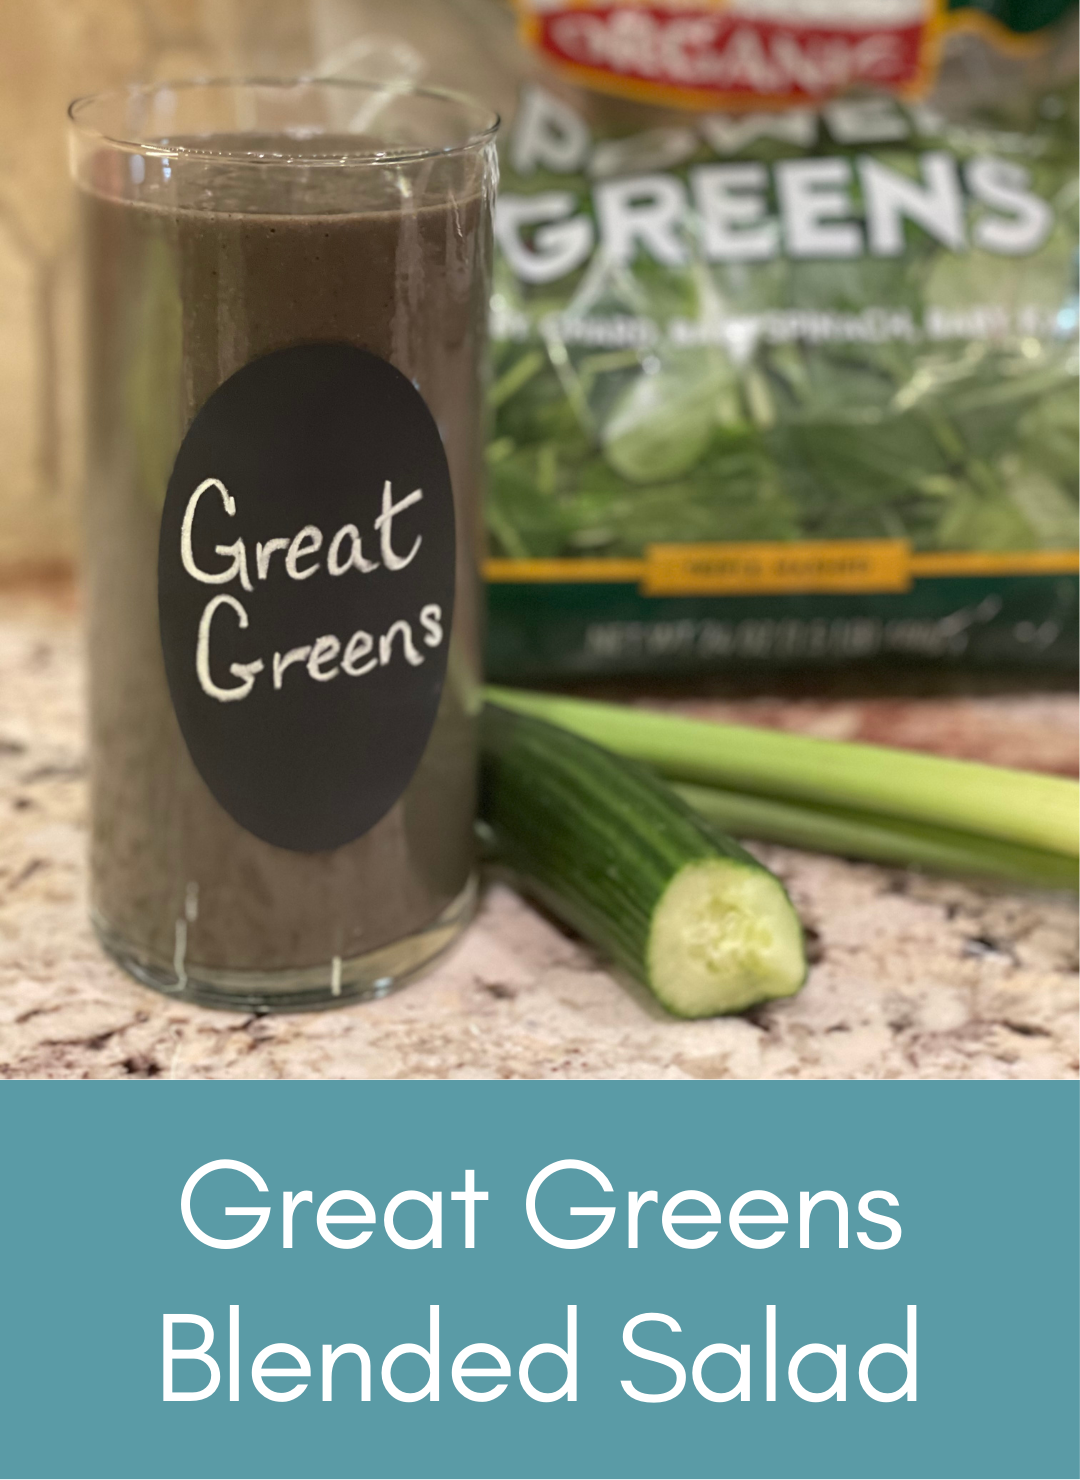 Great Greens Blended Salad plant based smoothie Picture with link to recipe